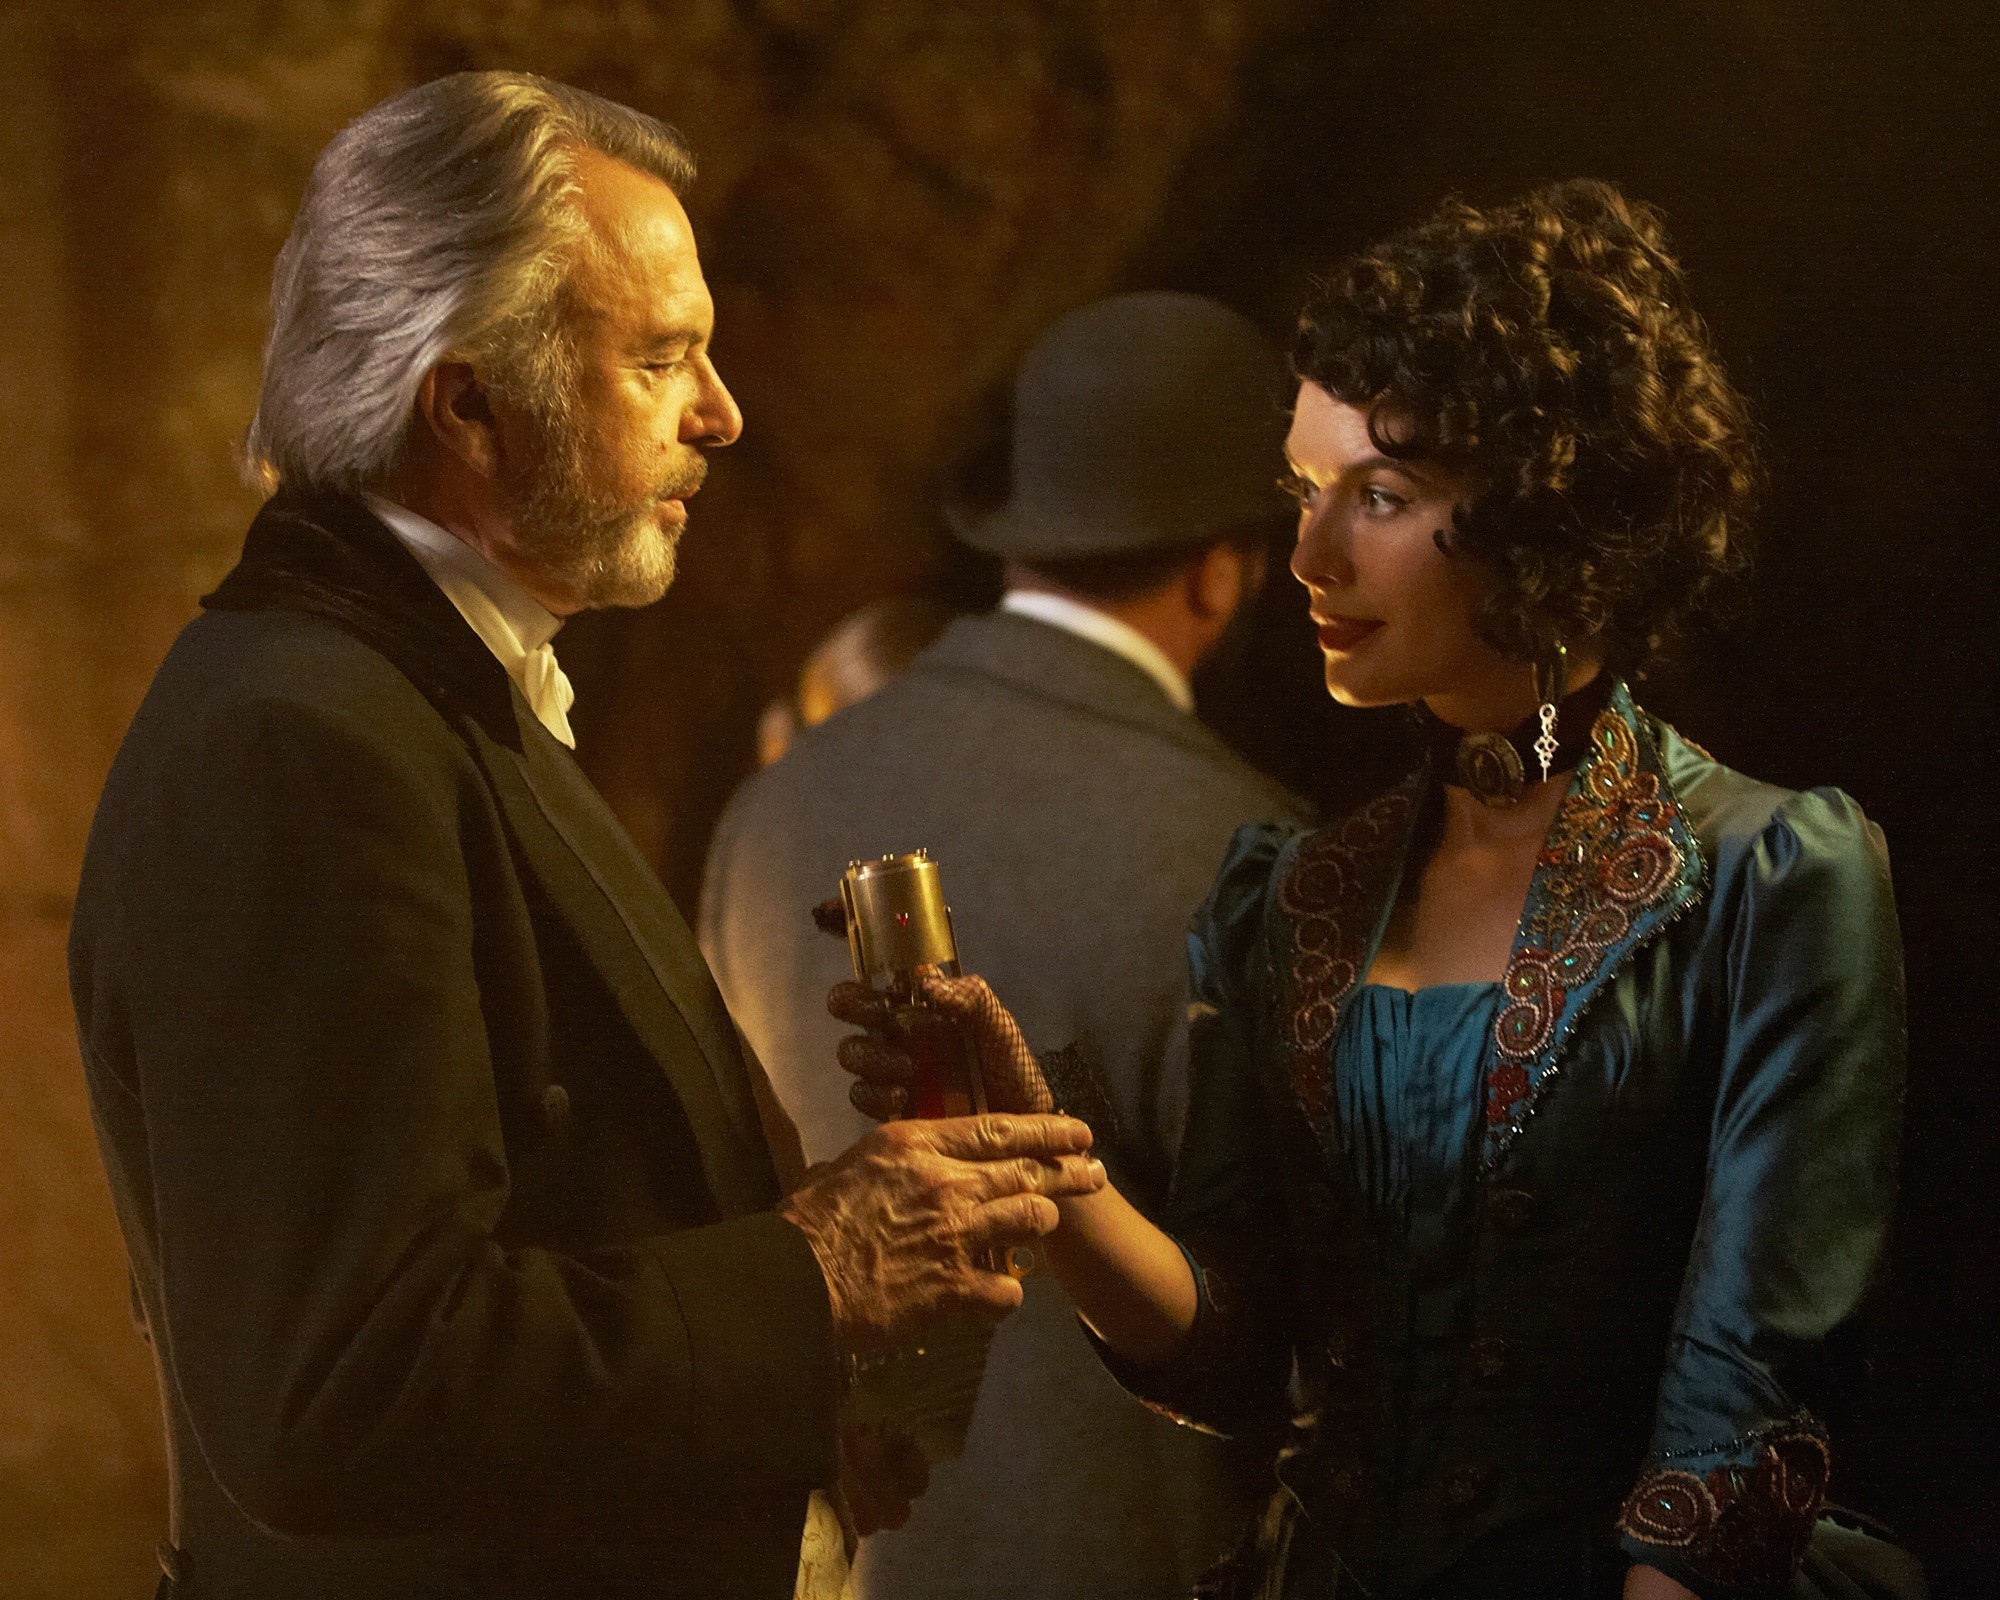 Sam Neill stars as Otto Luger and Lena Headey stars as Monica in Image Entertainment's The Adventurer: The Curse of the Midas Box (2014)